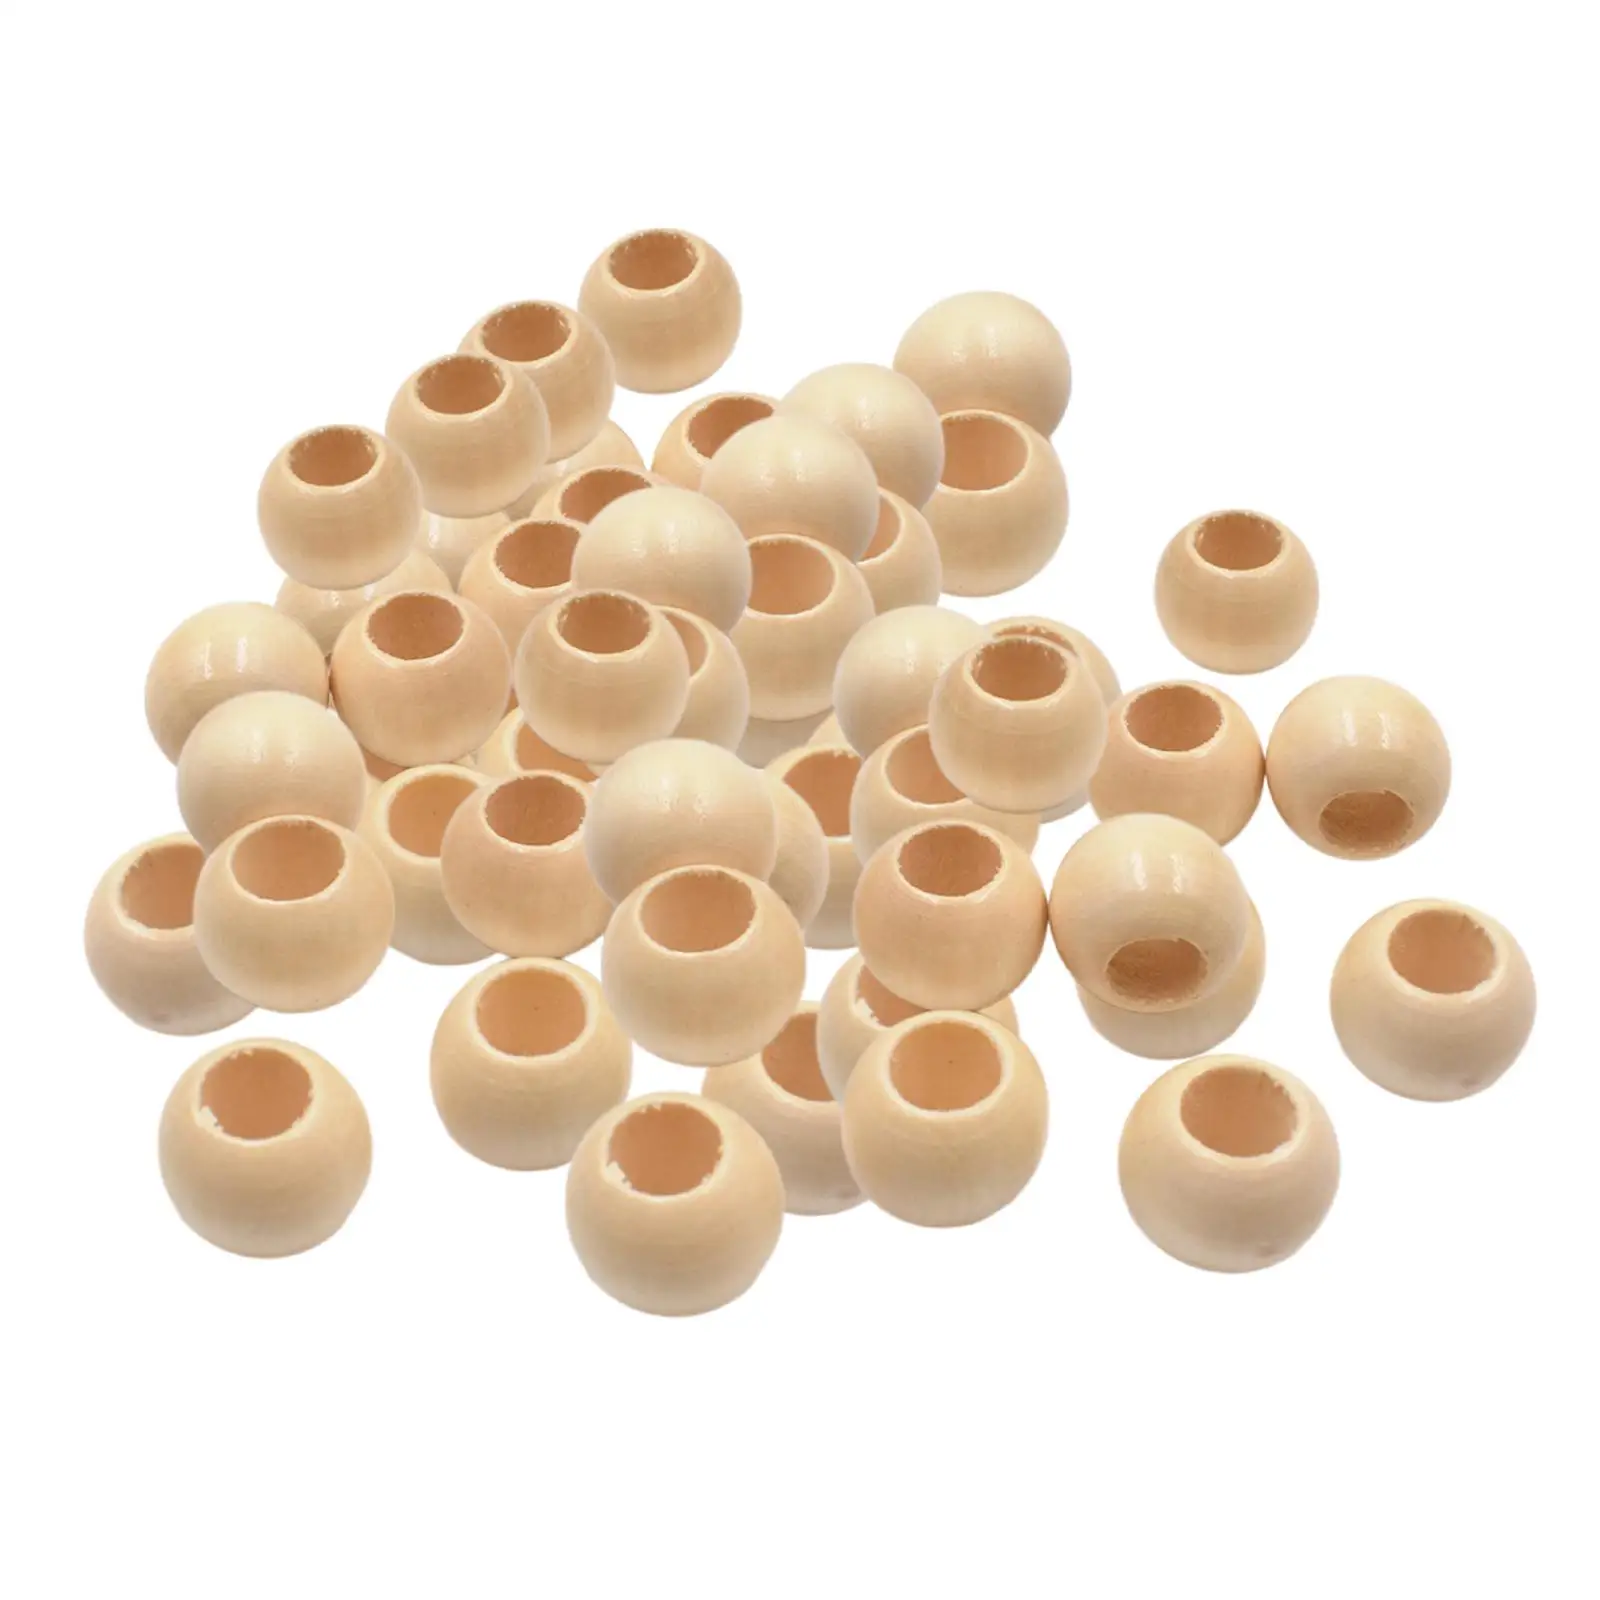 100x Wood Beads Craft Handmade Supplies 2cm Balls Round Beads Loose Beads for Jewelry Making Pendants Party Farmhouse Decoration